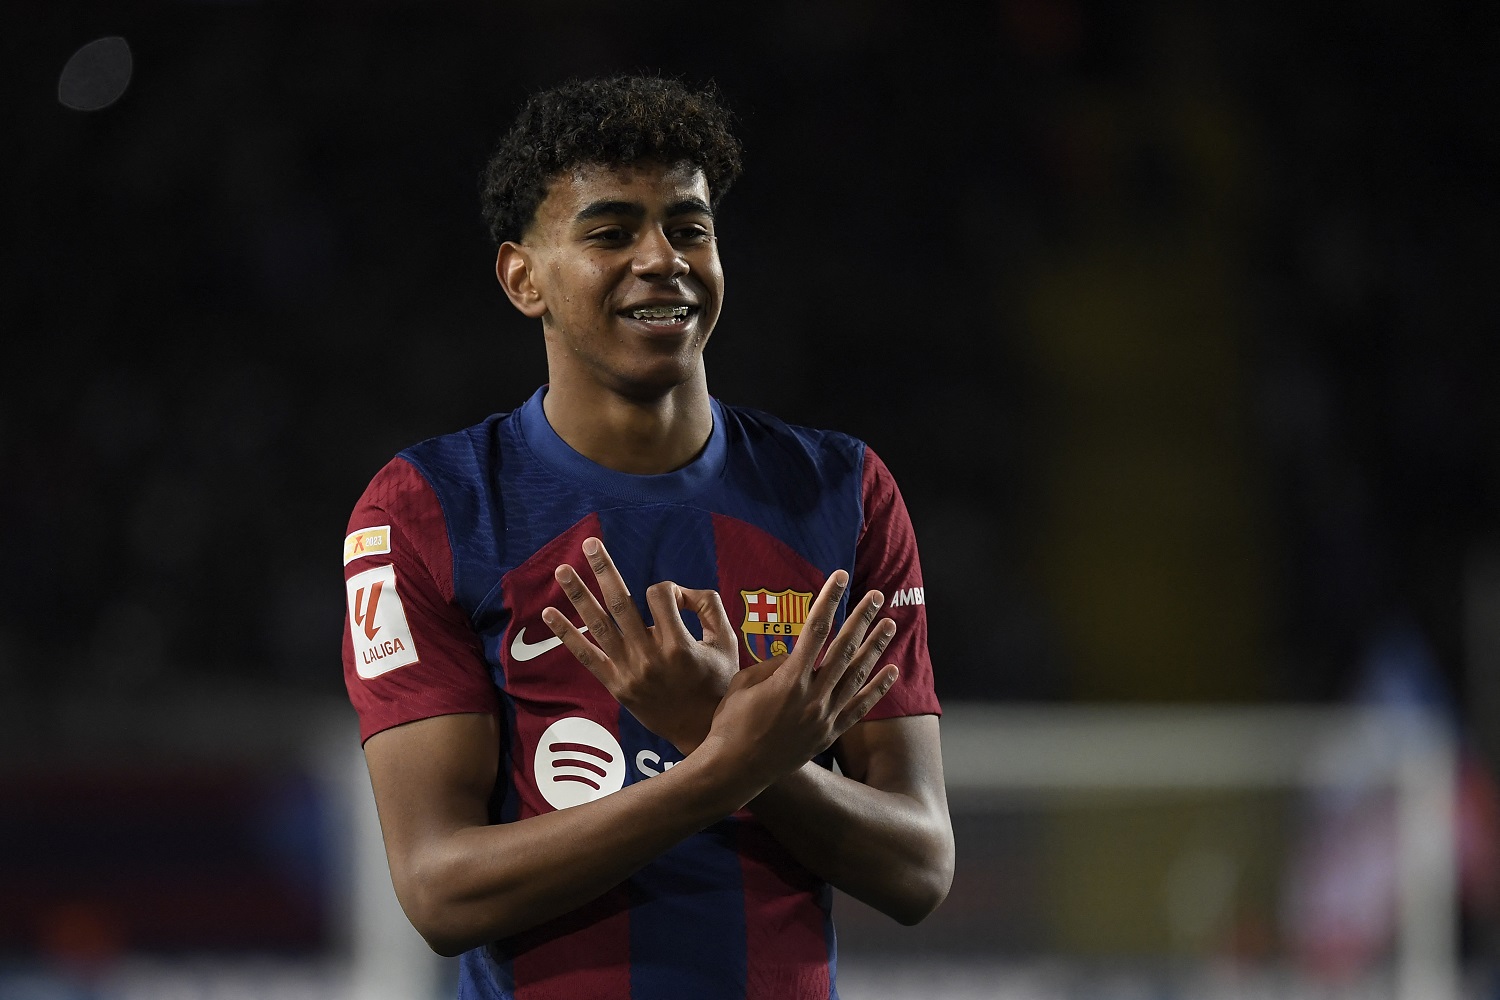 Barcelona’s Lamine Yamal opens up on debut, Xavi Hernandez and his ears popping at Camp Nou